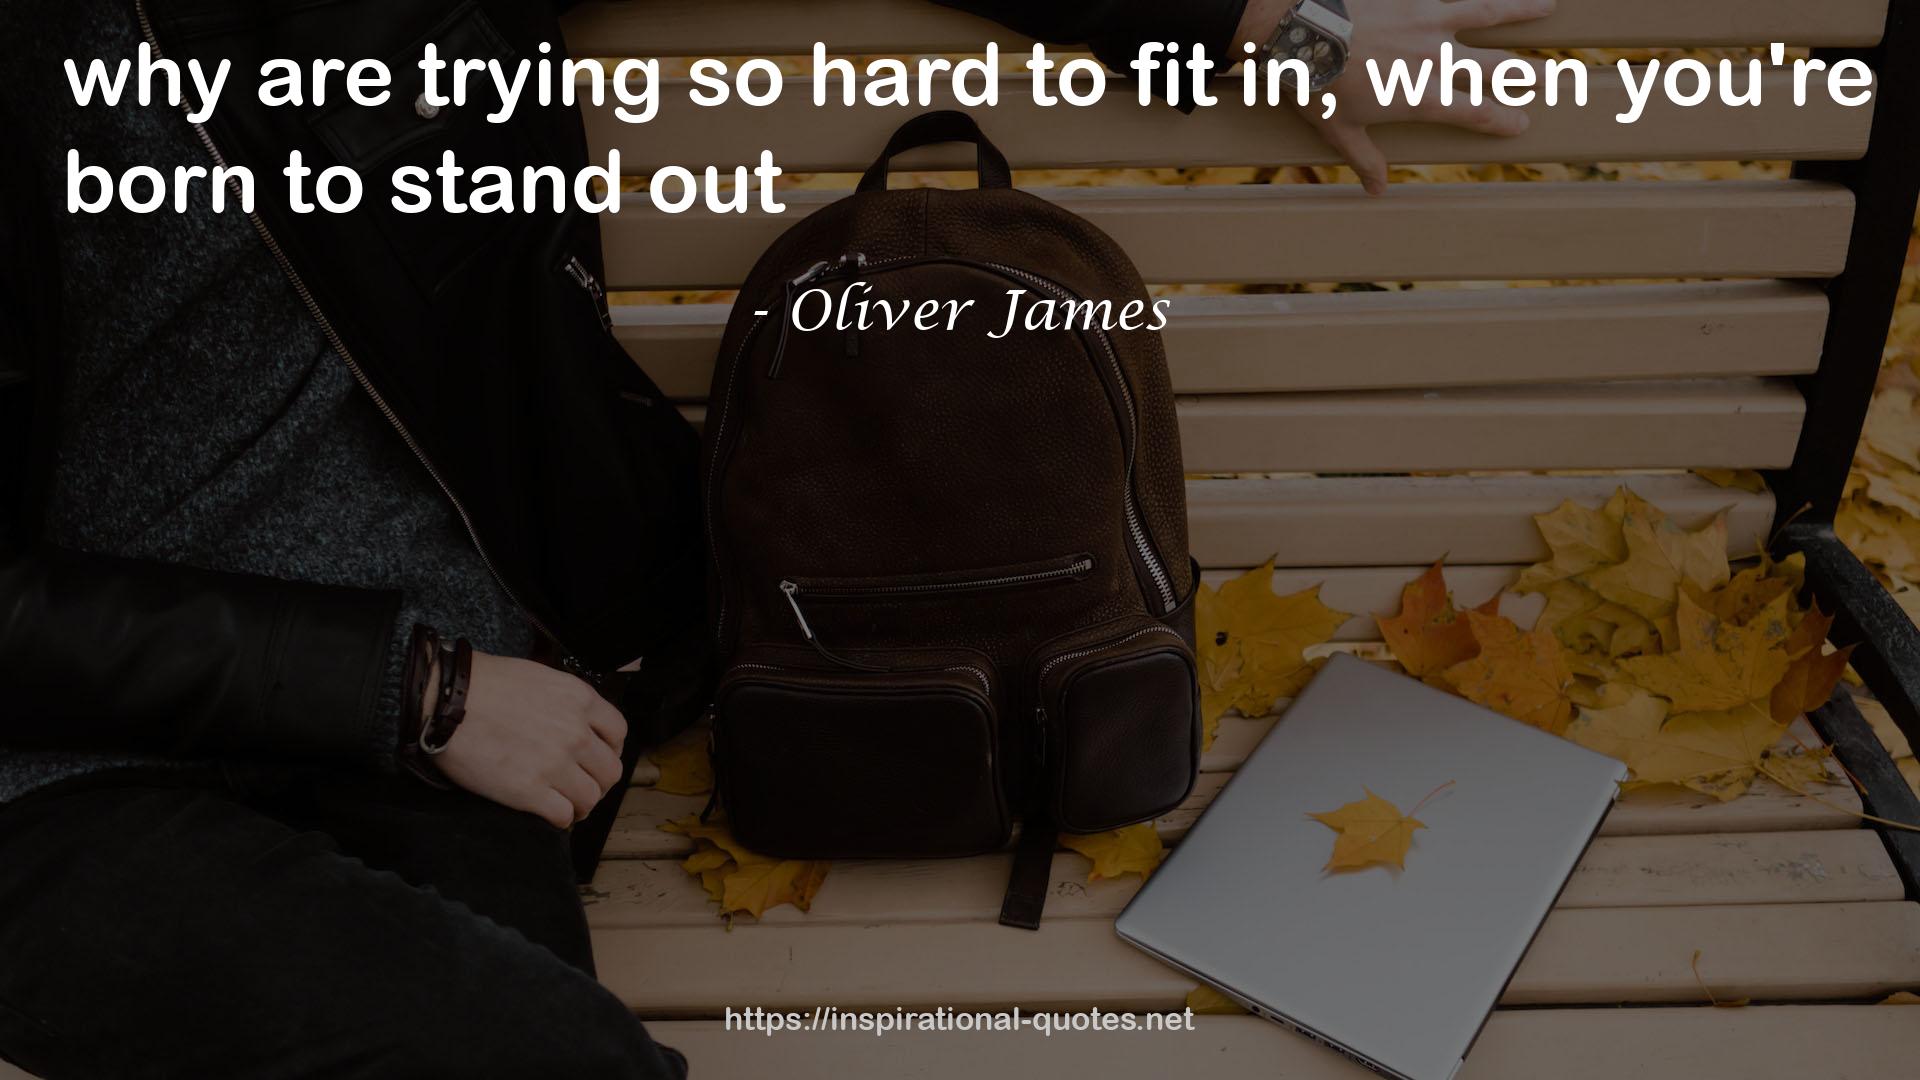 Oliver James QUOTES